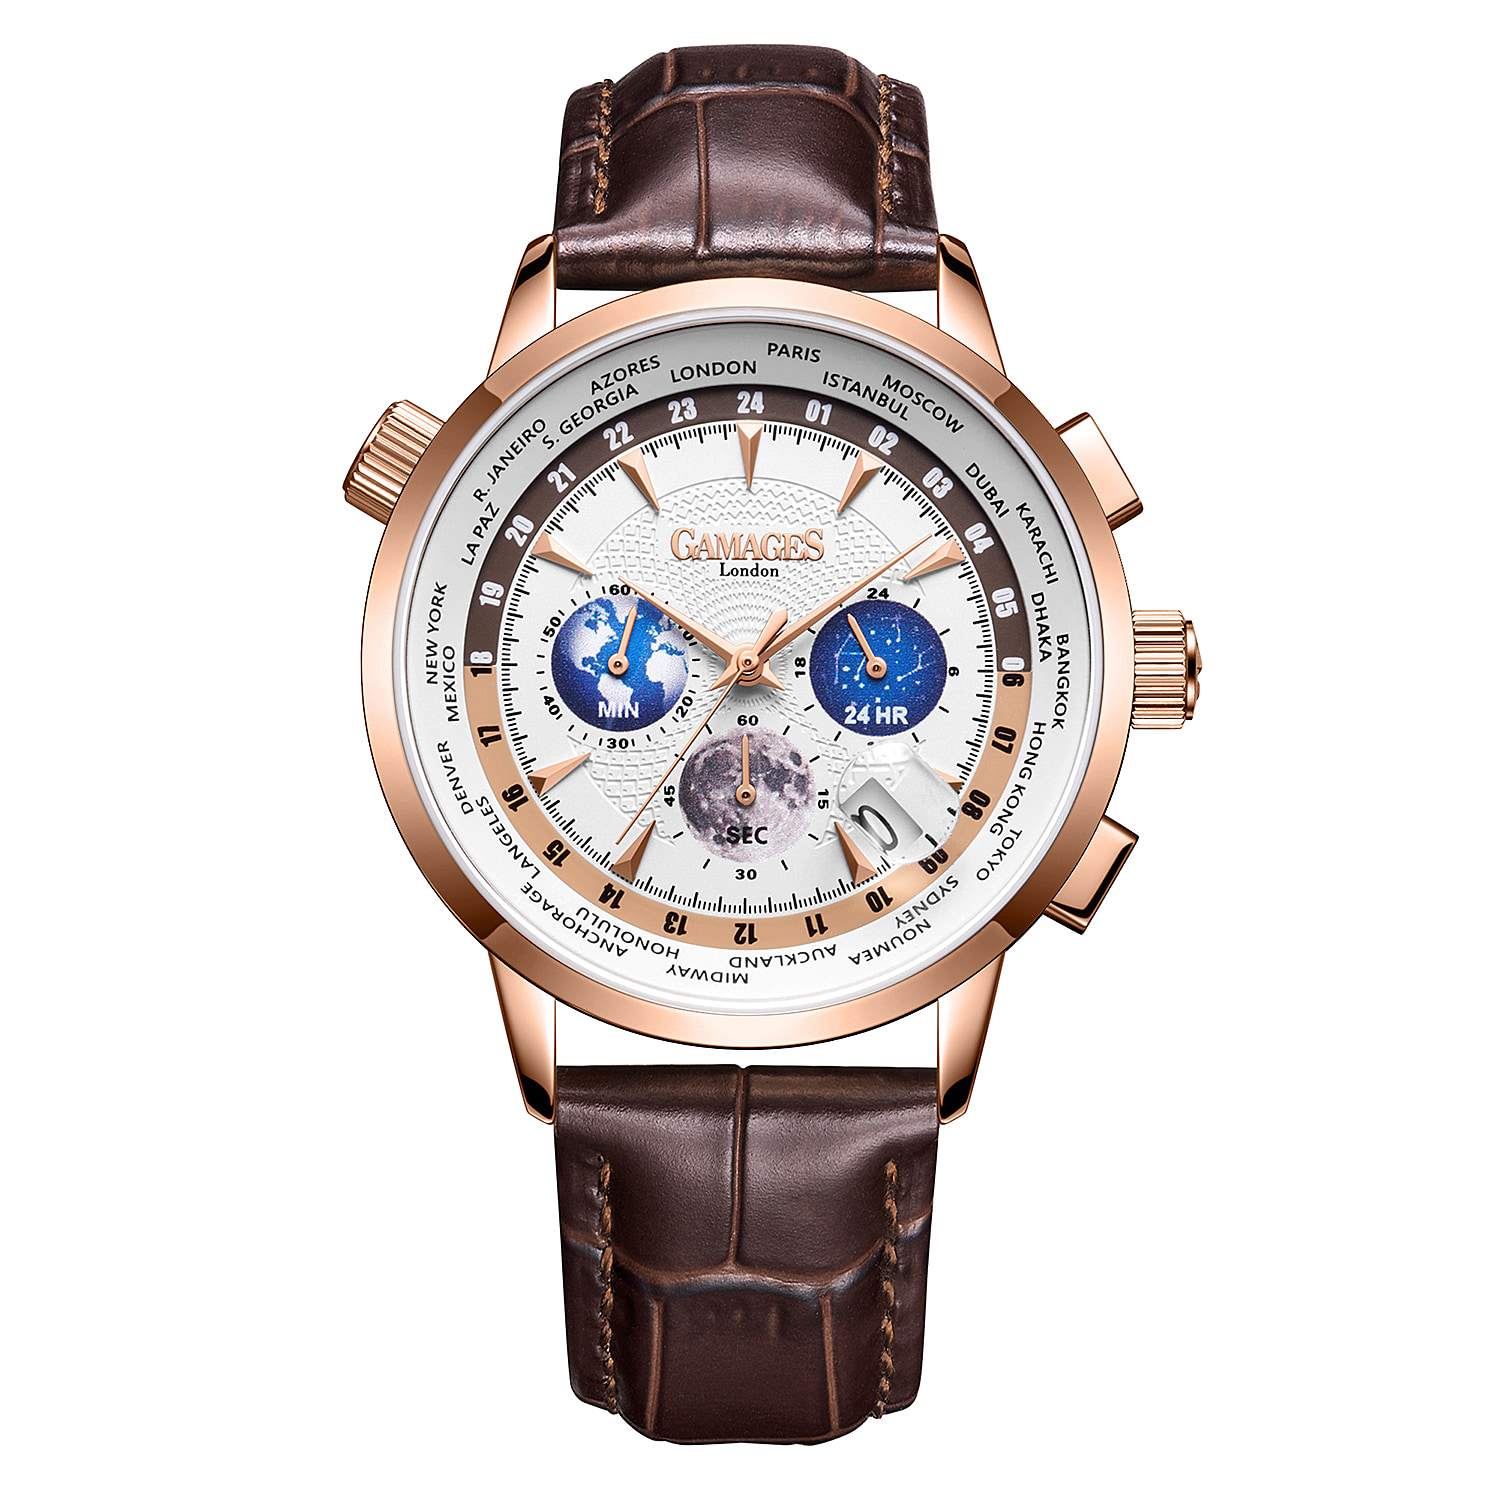 Gamages Of London: Stratosphere Mechanical Quartz Automatic Mens Watch in Stainless Steel